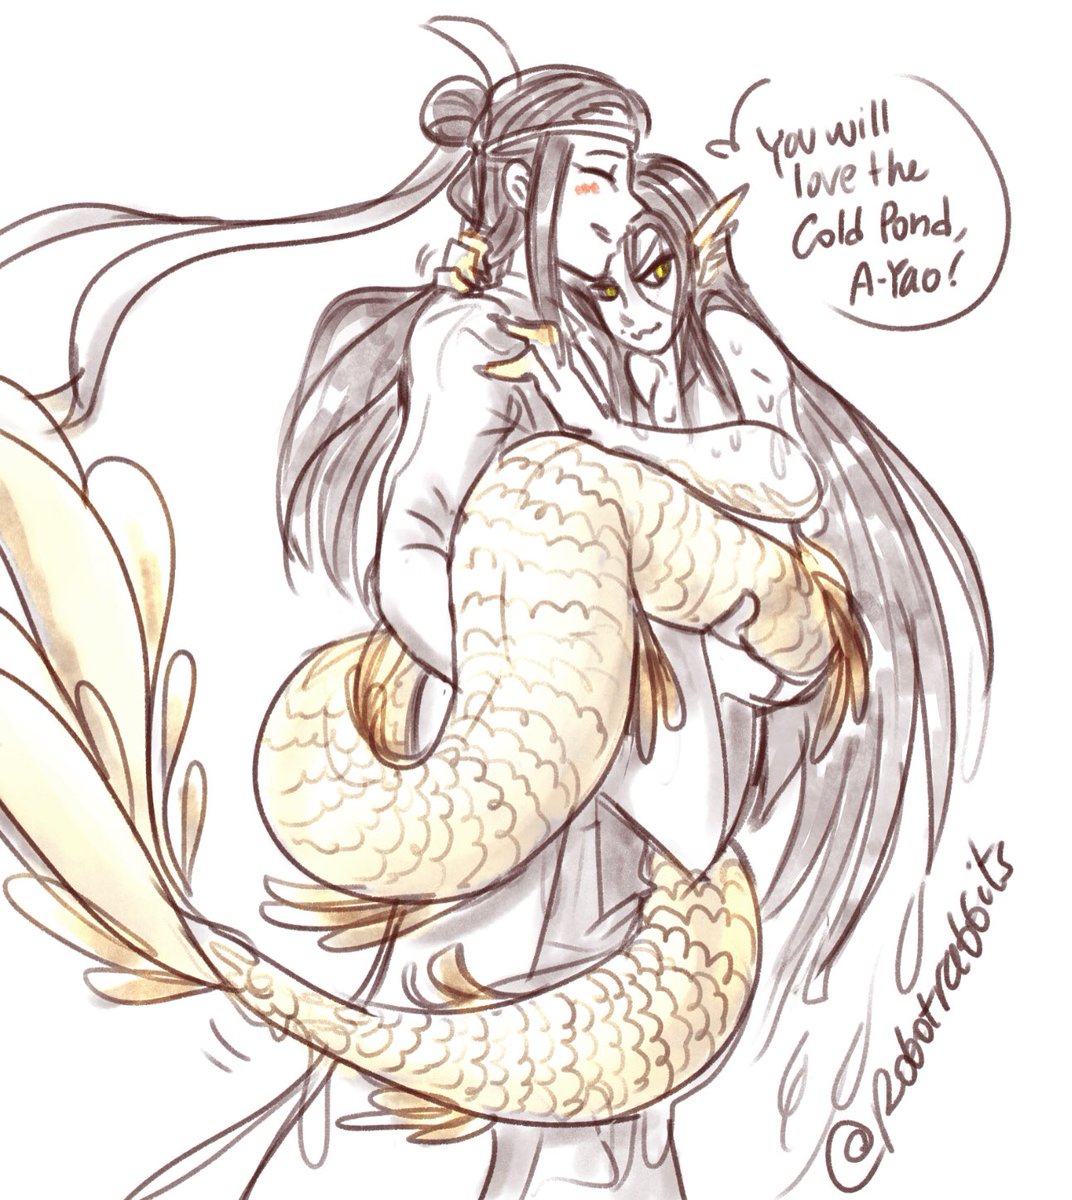 another day 2: underwater #JGYweekend2022 (xiyao) He caught himself a cultivator 🐠